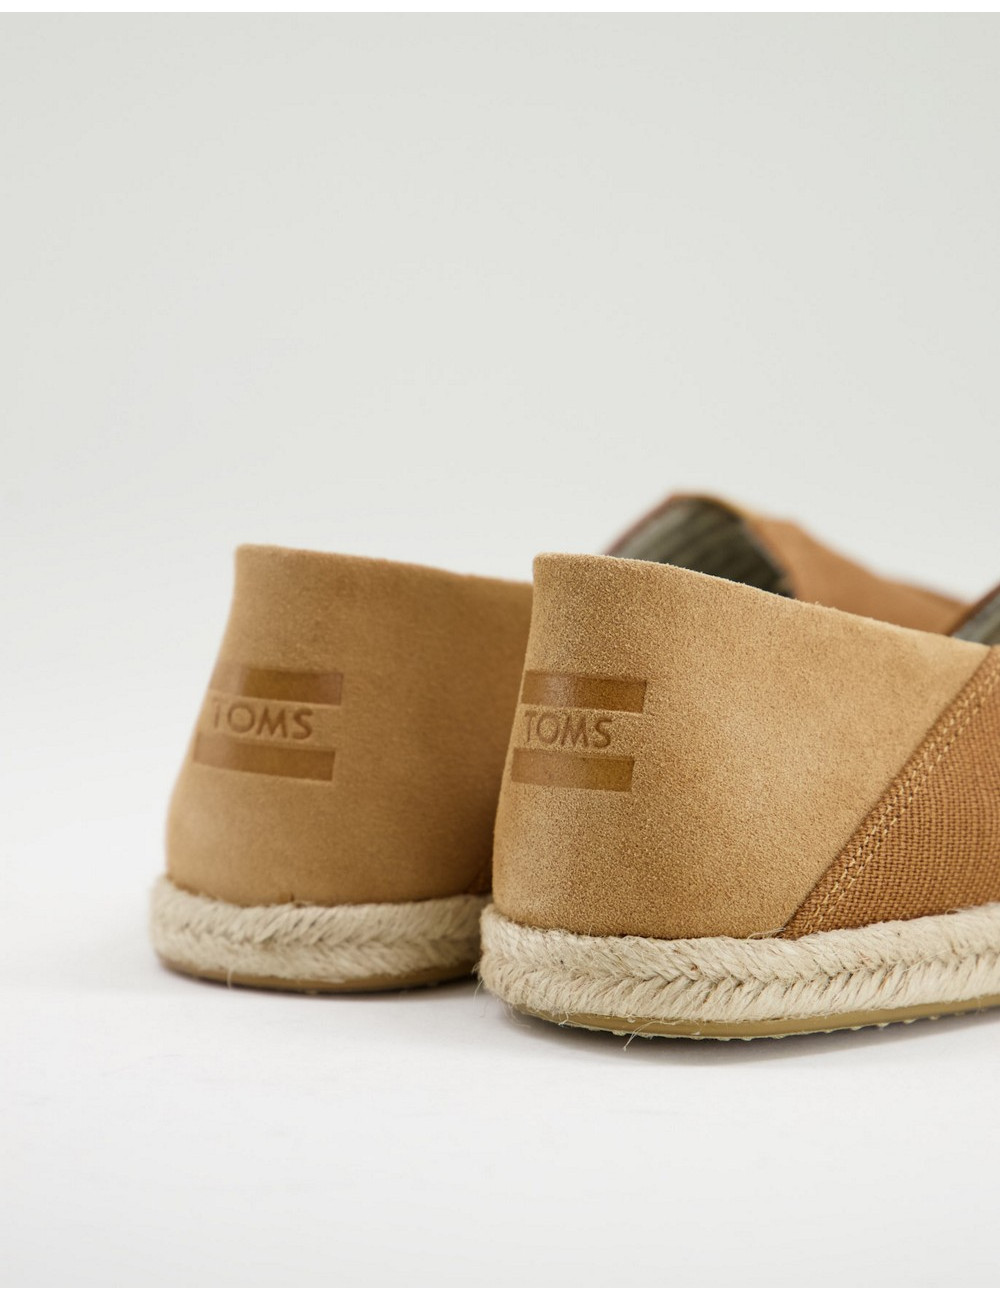 Toms espadrille in yellow